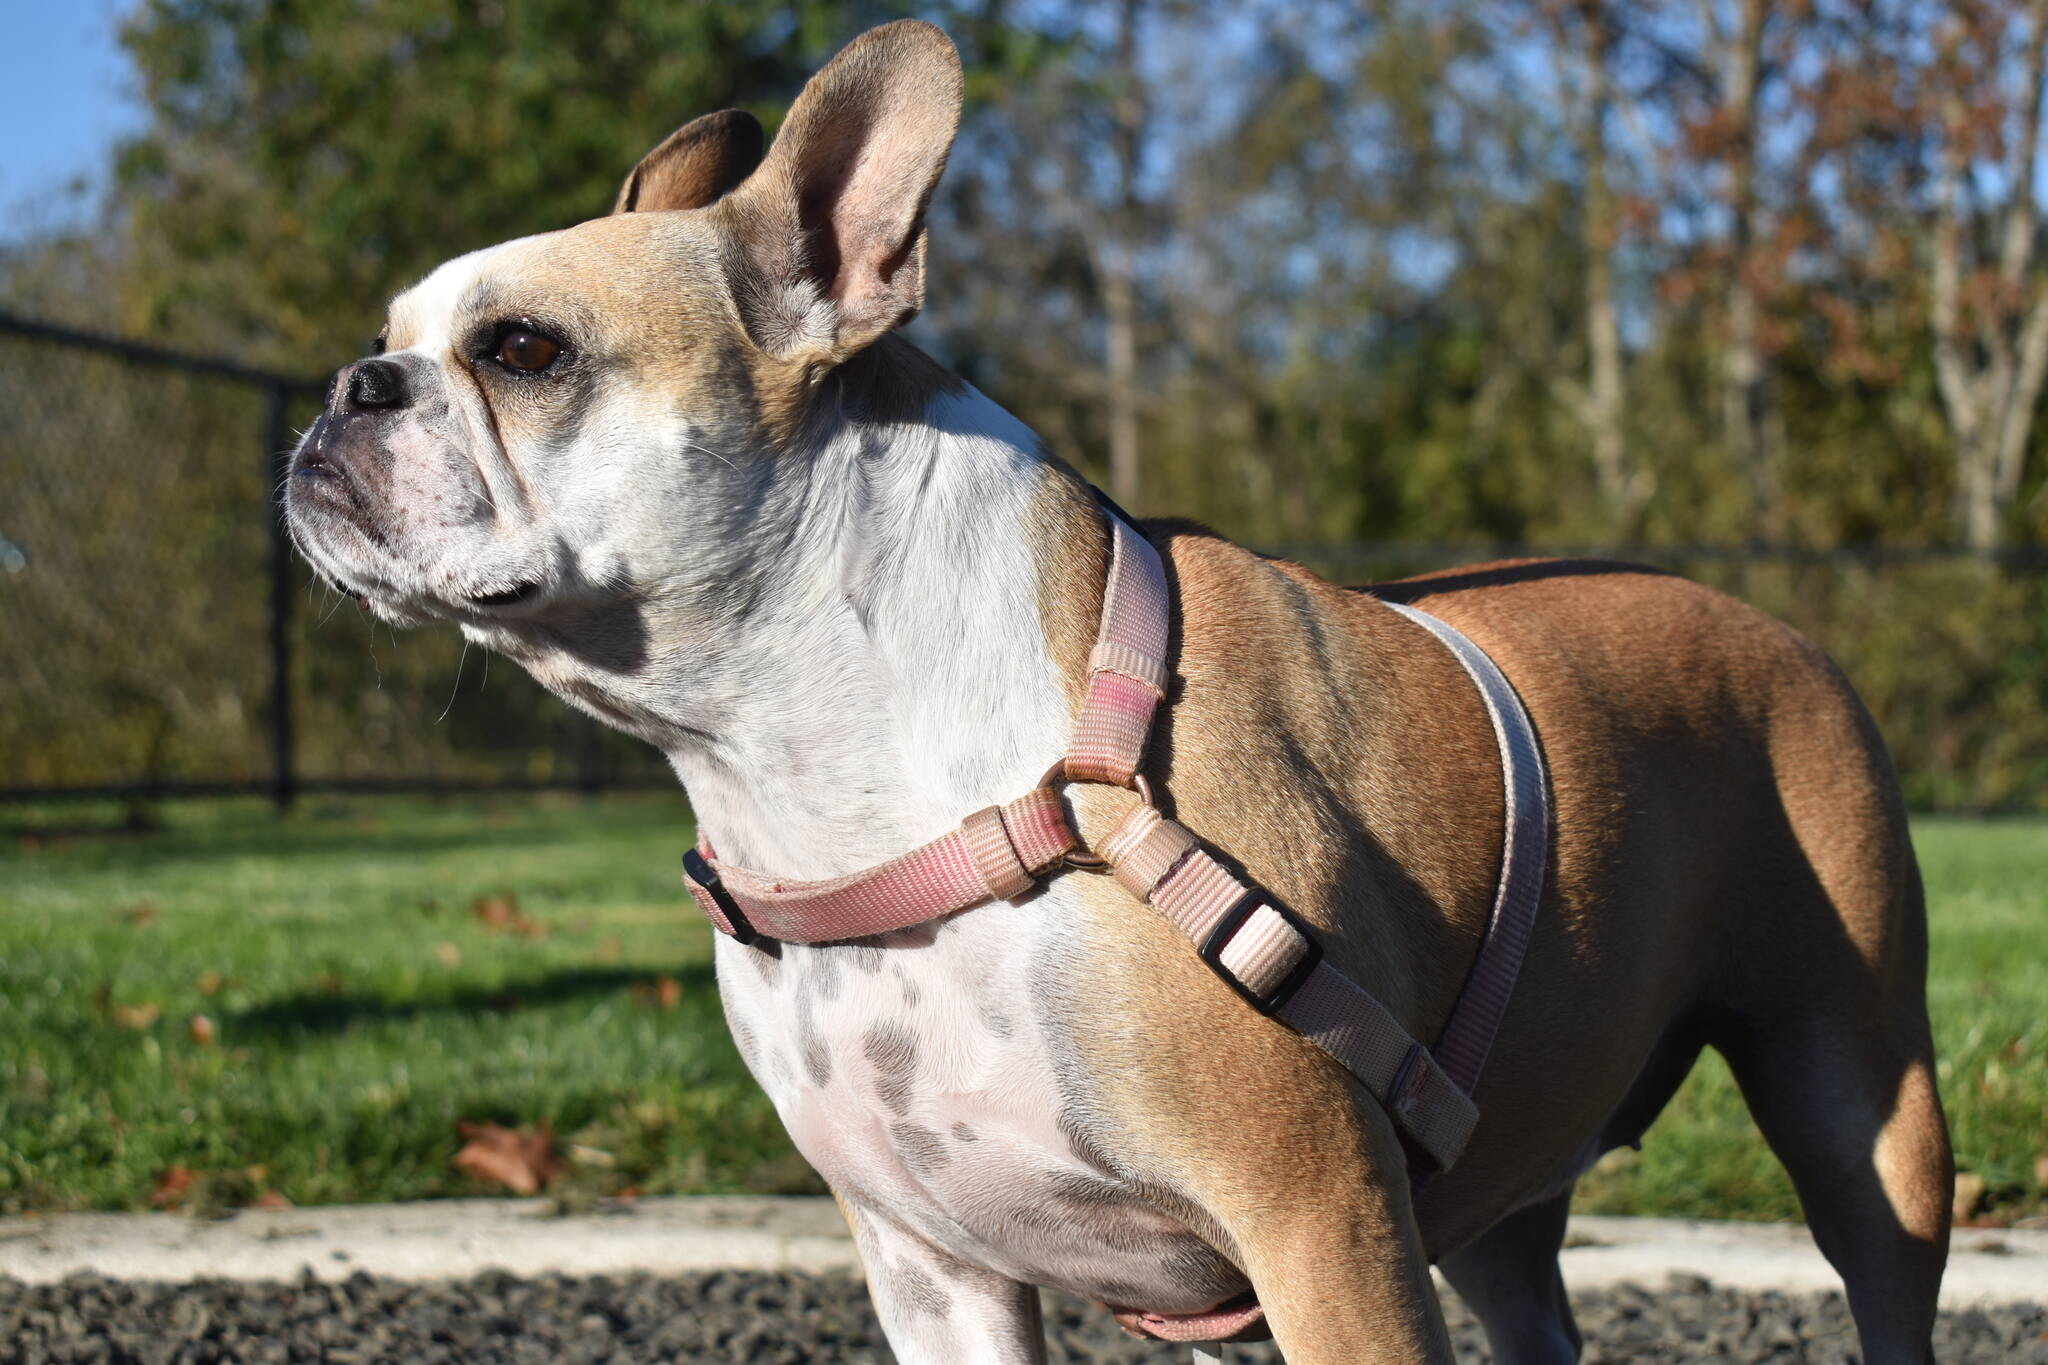 Kiwi, a frenchton, soaks in the sun at the Vance Creek Dog Park on Oct. 27. (Clayton Franke / The Daily World)